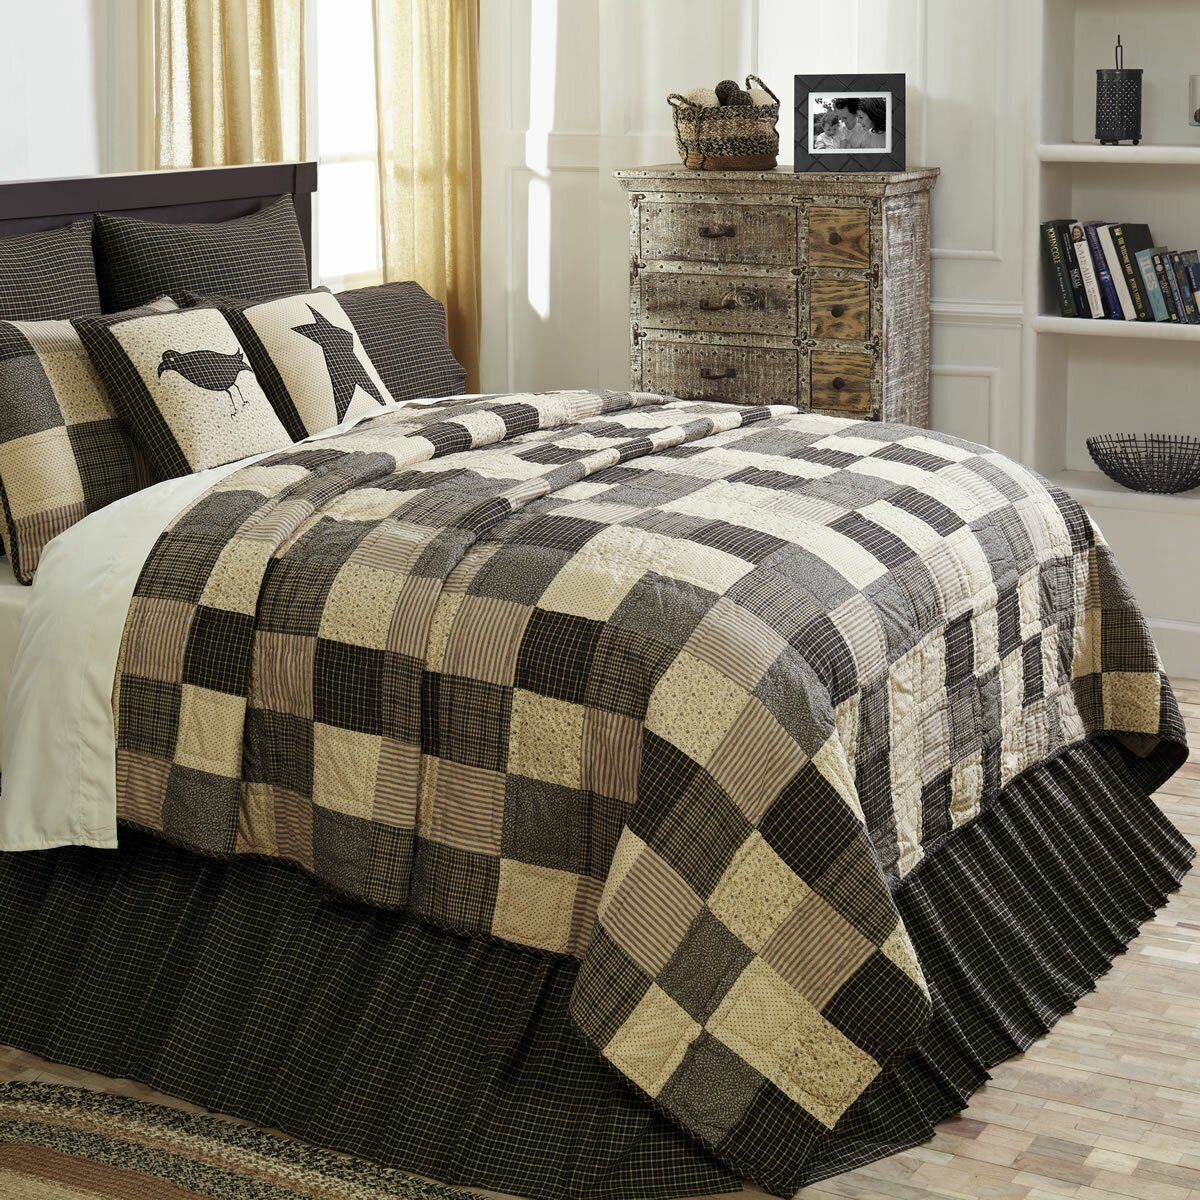 Traditional patchwork quilt